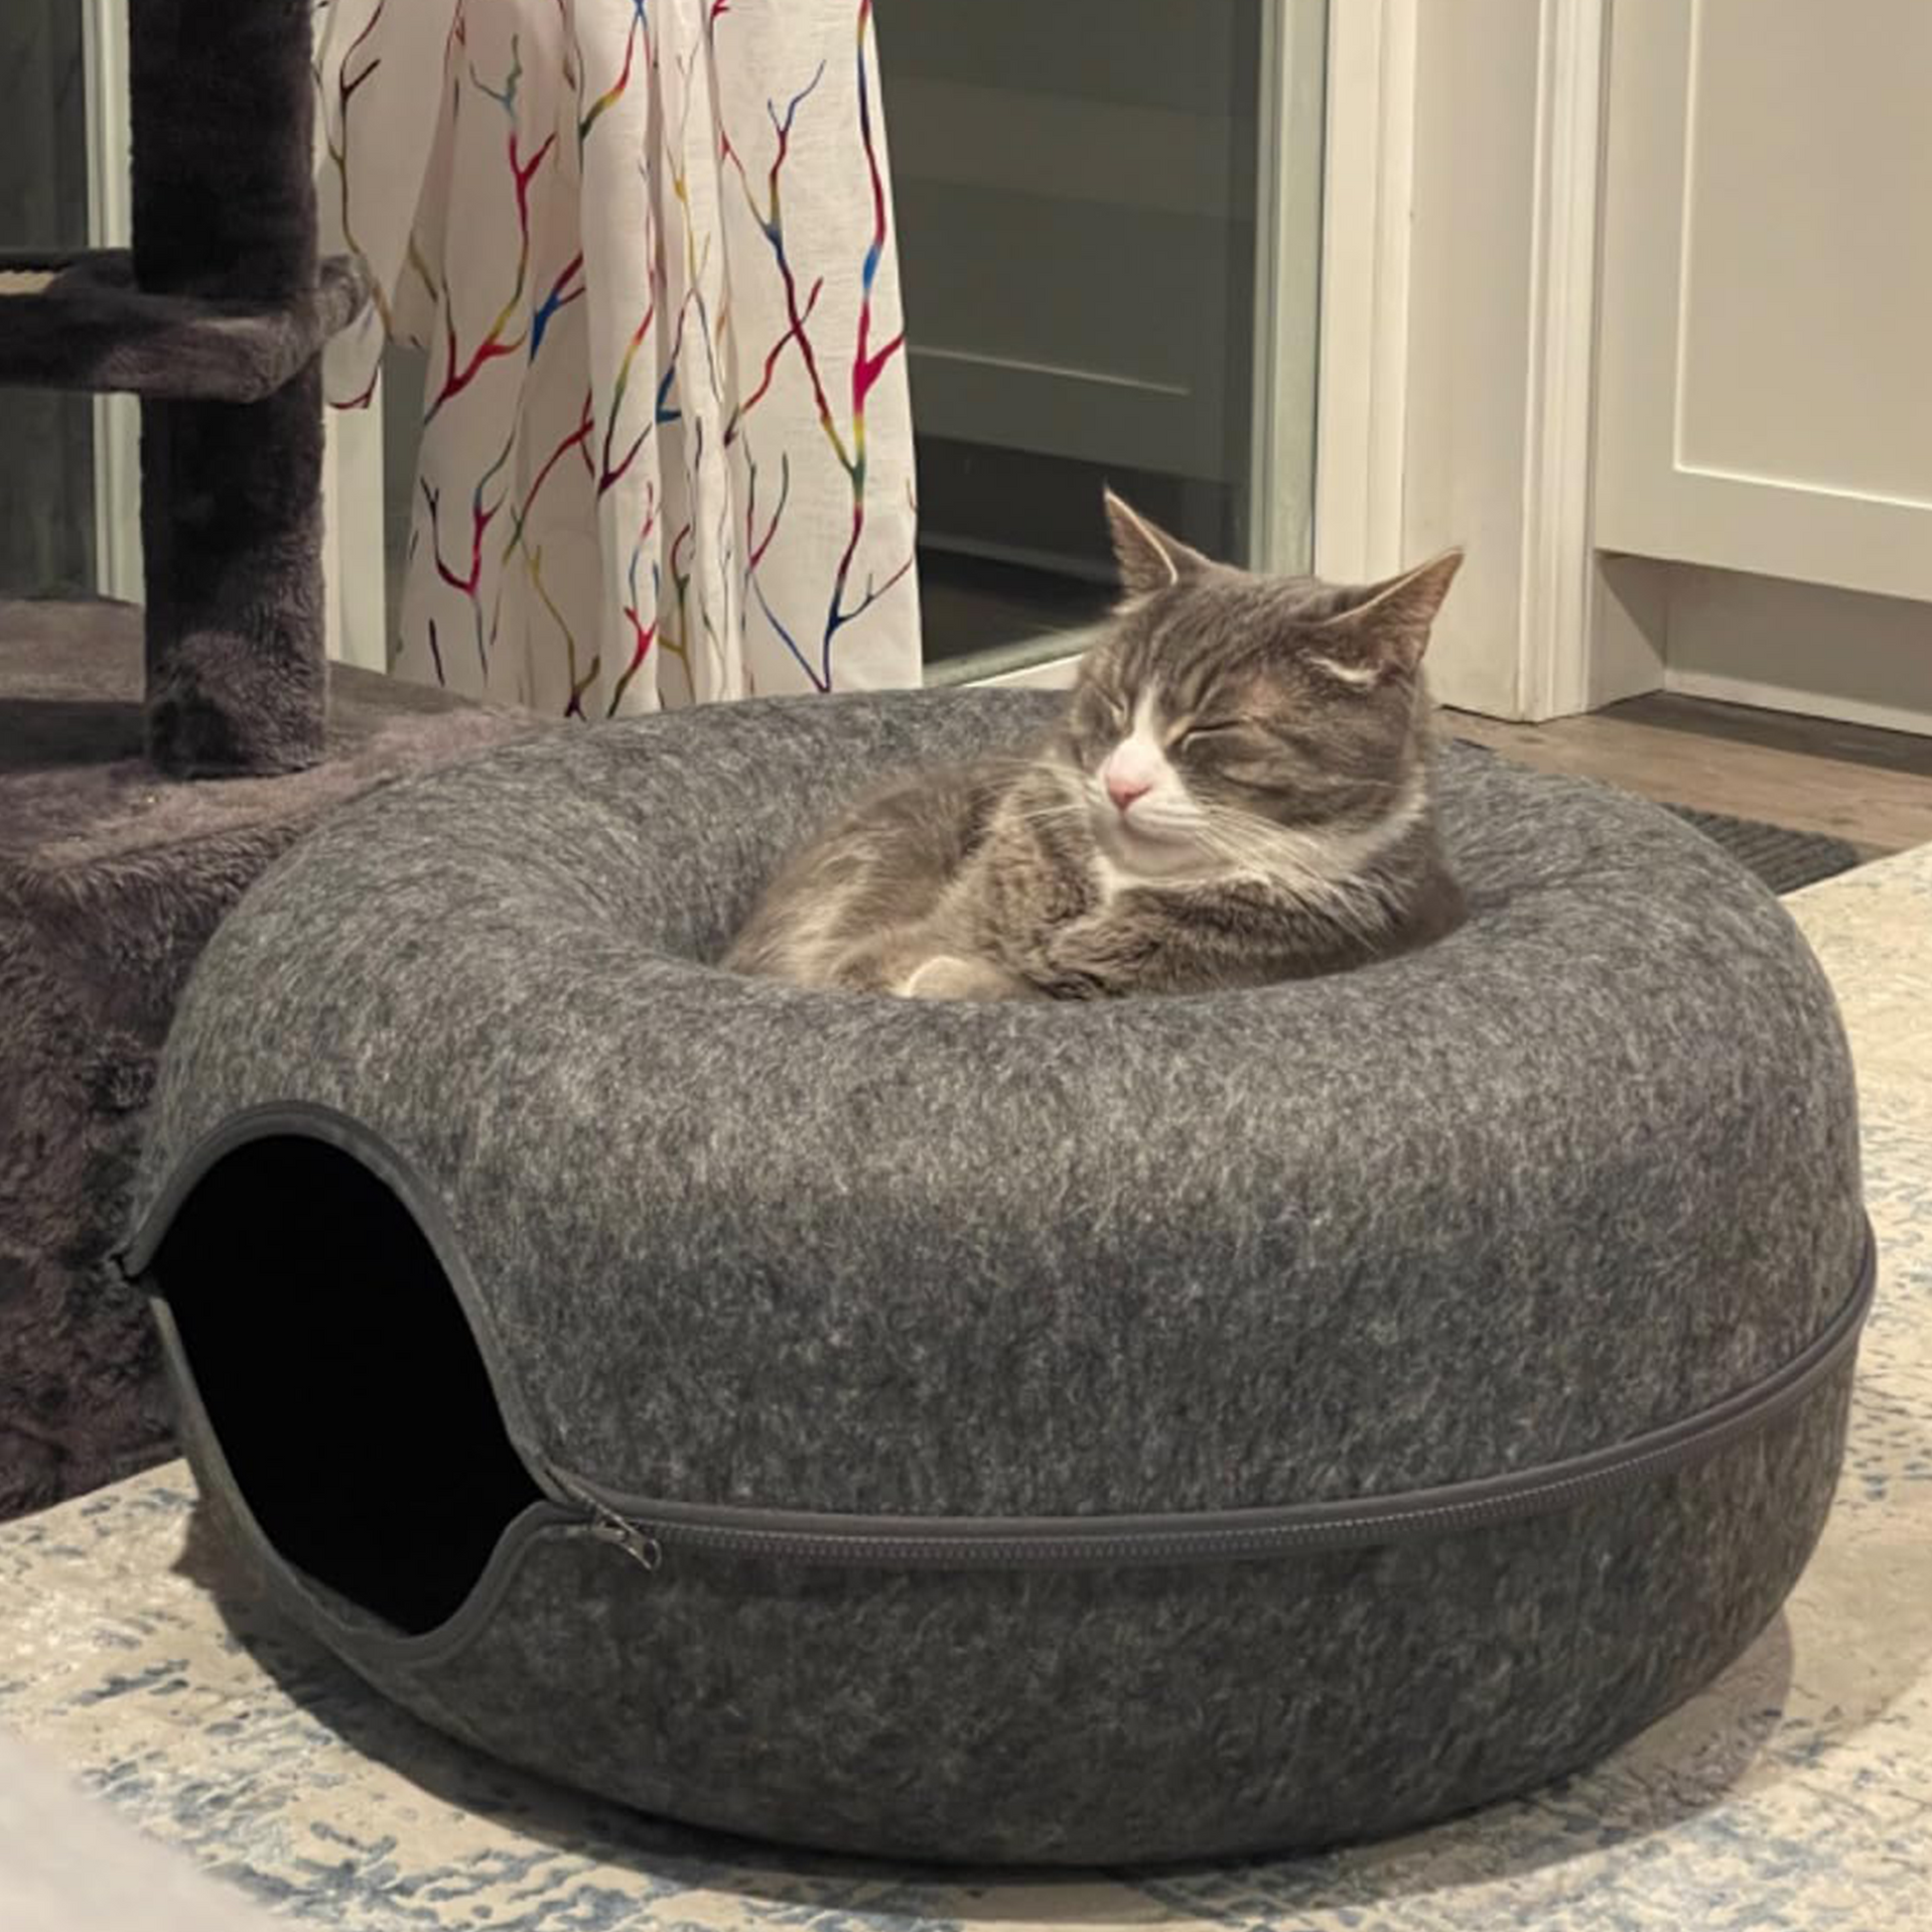 Cat Donut Tunnel, Peekaboo Cat Cave, Cat Tunnel for Large Cats Up to 15lbs | Detachable Round Felt & Washable Interior Cat Hideout, Great for Indoor Cats-Pets Are Framily